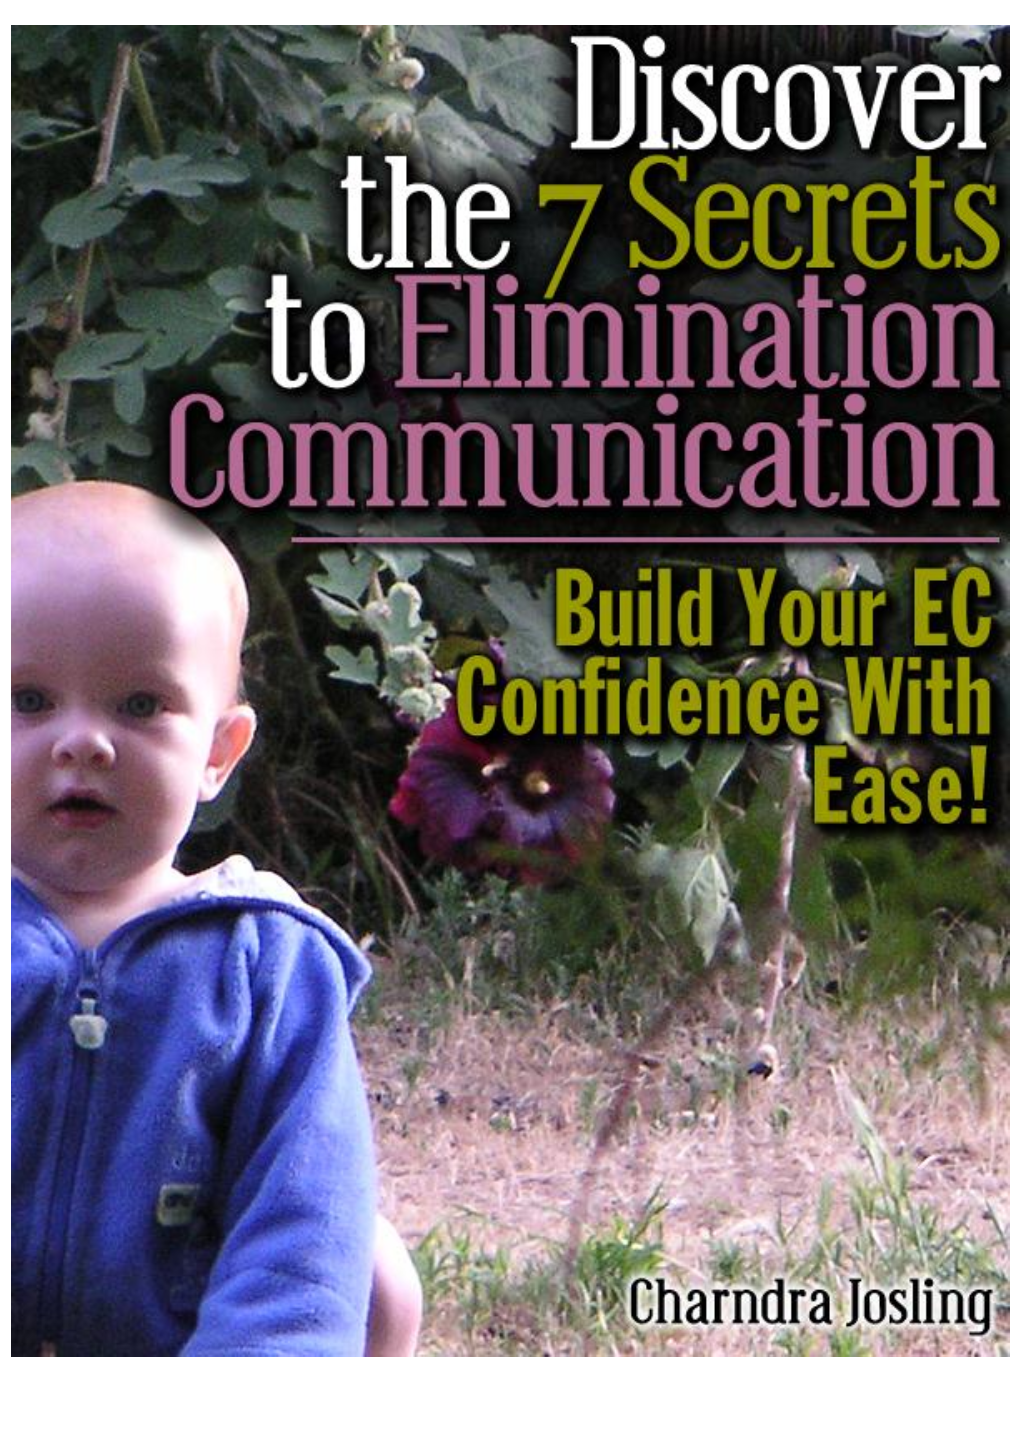 Discover the 7 Secrets to Elimination Communication... Thank You for Downloading My Free Ebook